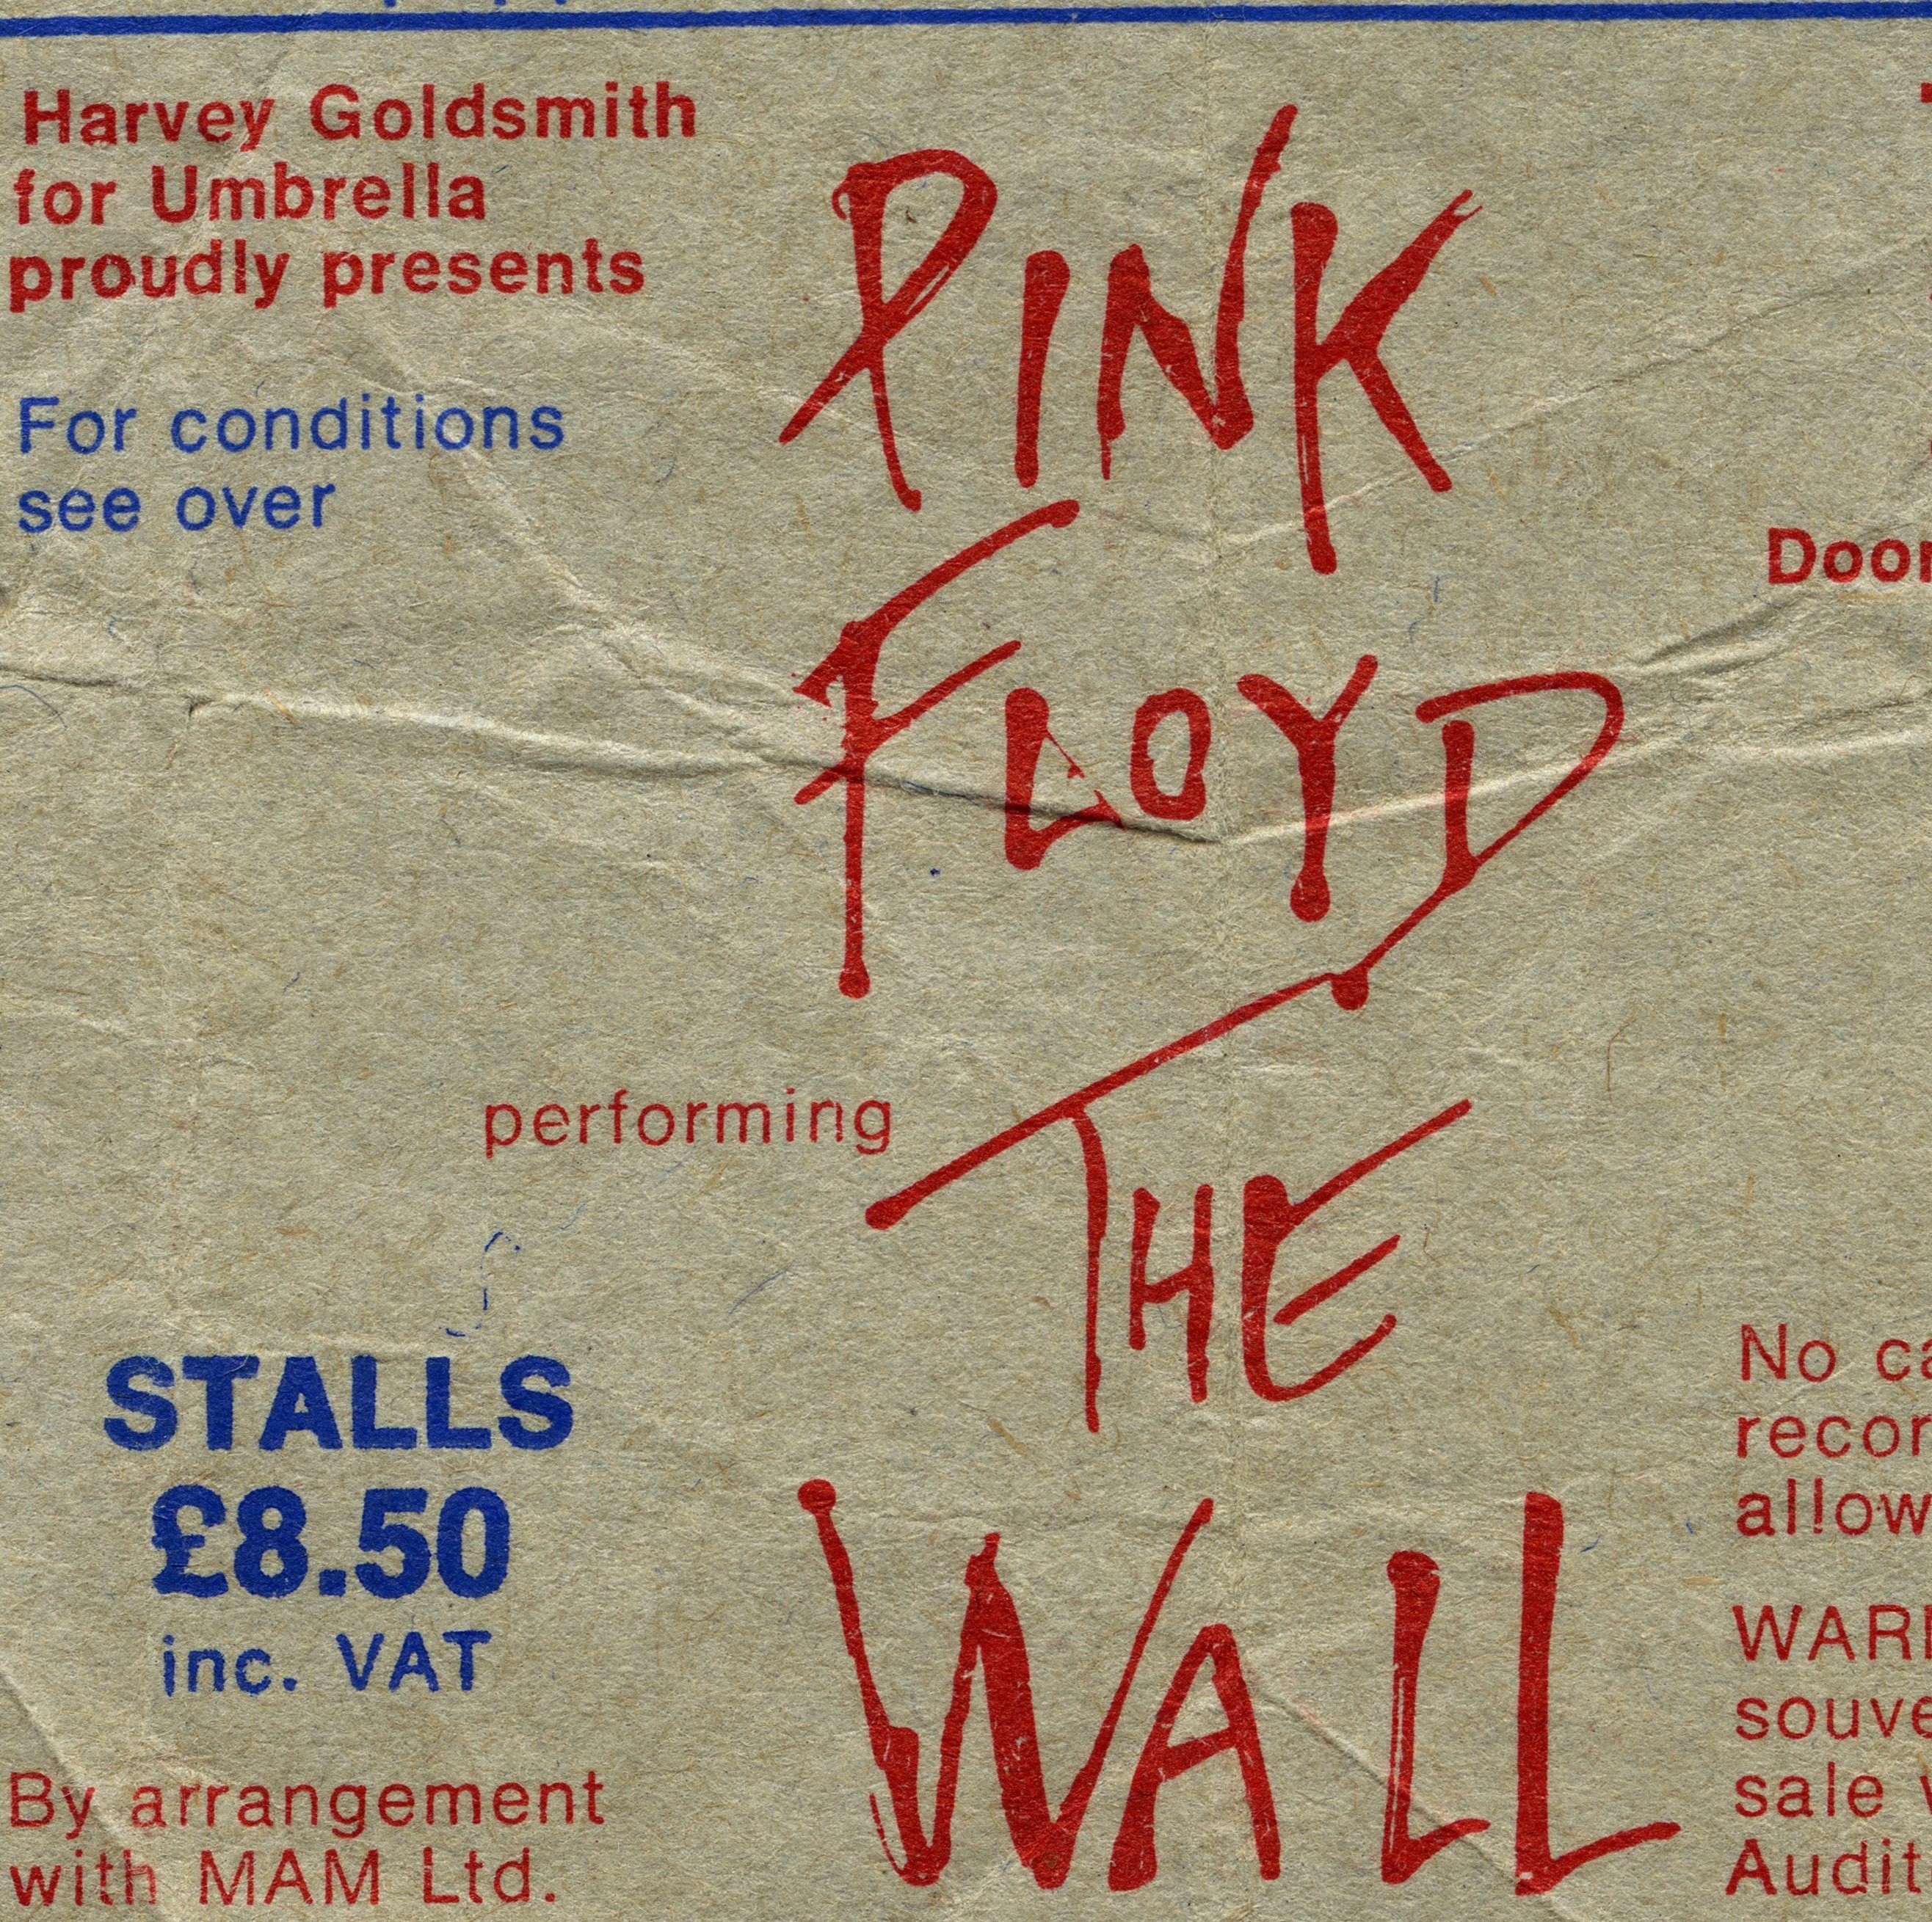 A ticket for Pink Floyd's 'The Wall' featuring the album's logo